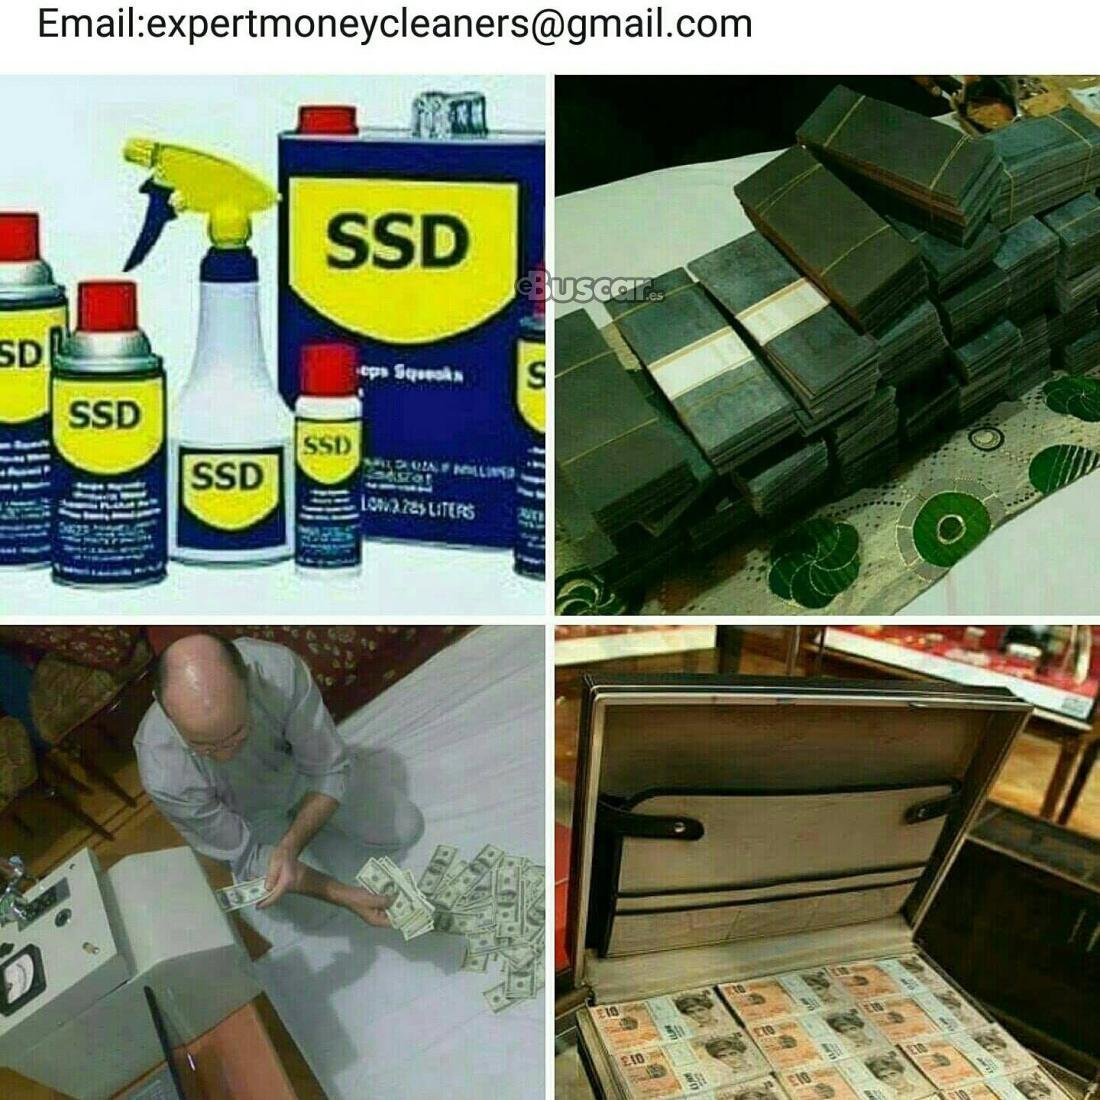 SSD CHEMICAL SOLUTION FOR CLEANING BLACK MONEY IN SOUTH AFRICA+27839746943 PRETORIA,